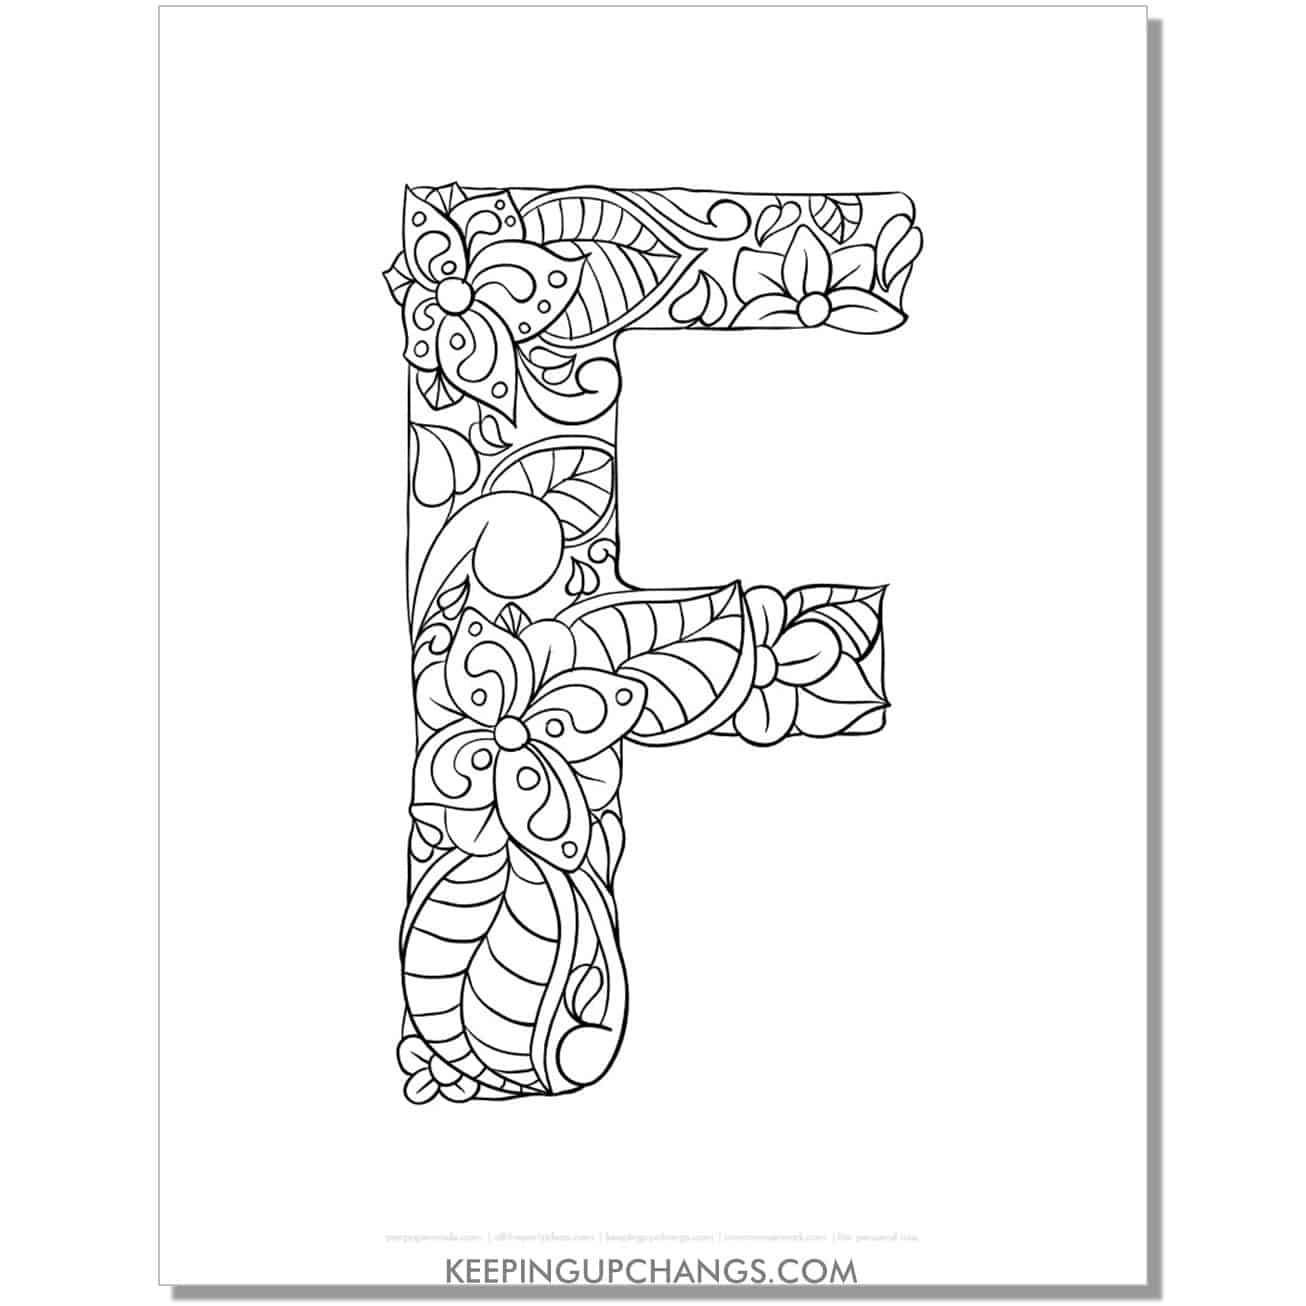 free abc f to color, complicated mandala zentangle for adults.